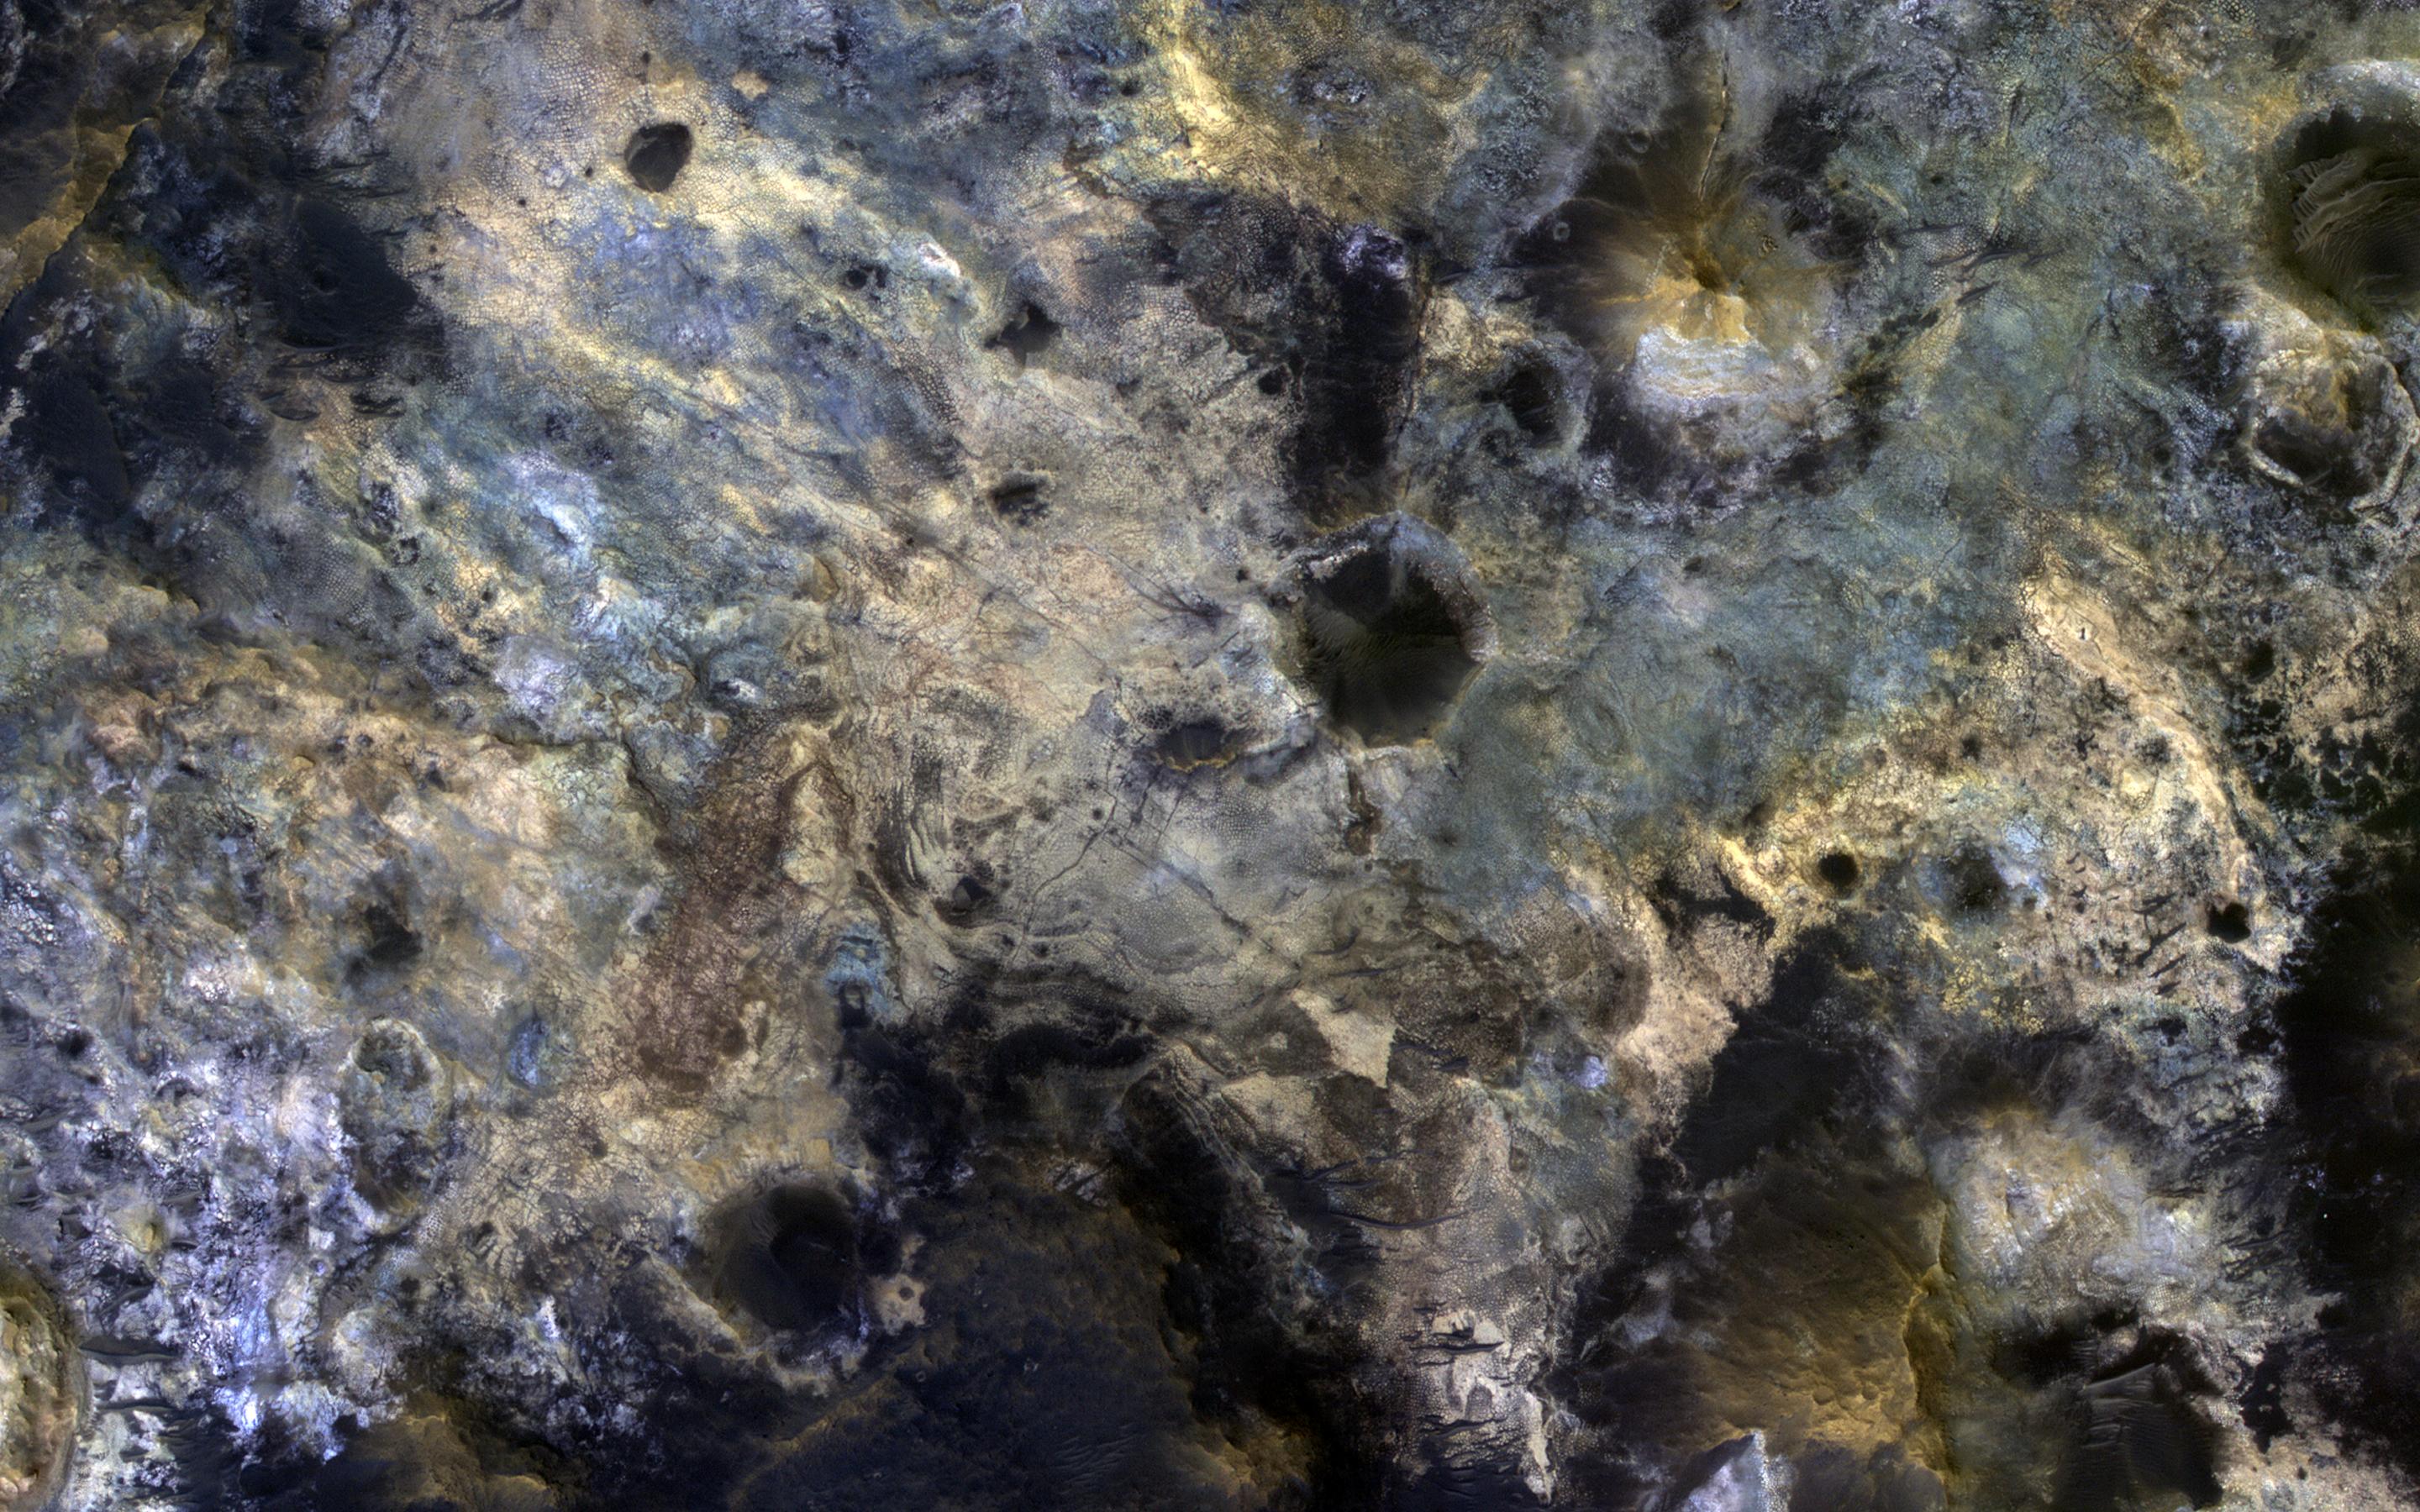 This image acquired on February 7, 2019 by NASAs Mars Reconnaissance Orbiter, shows Mawrth Vallis, a place on Mars that has fascinated scientists because of the clays and other hydrated minerals detected from orbit.